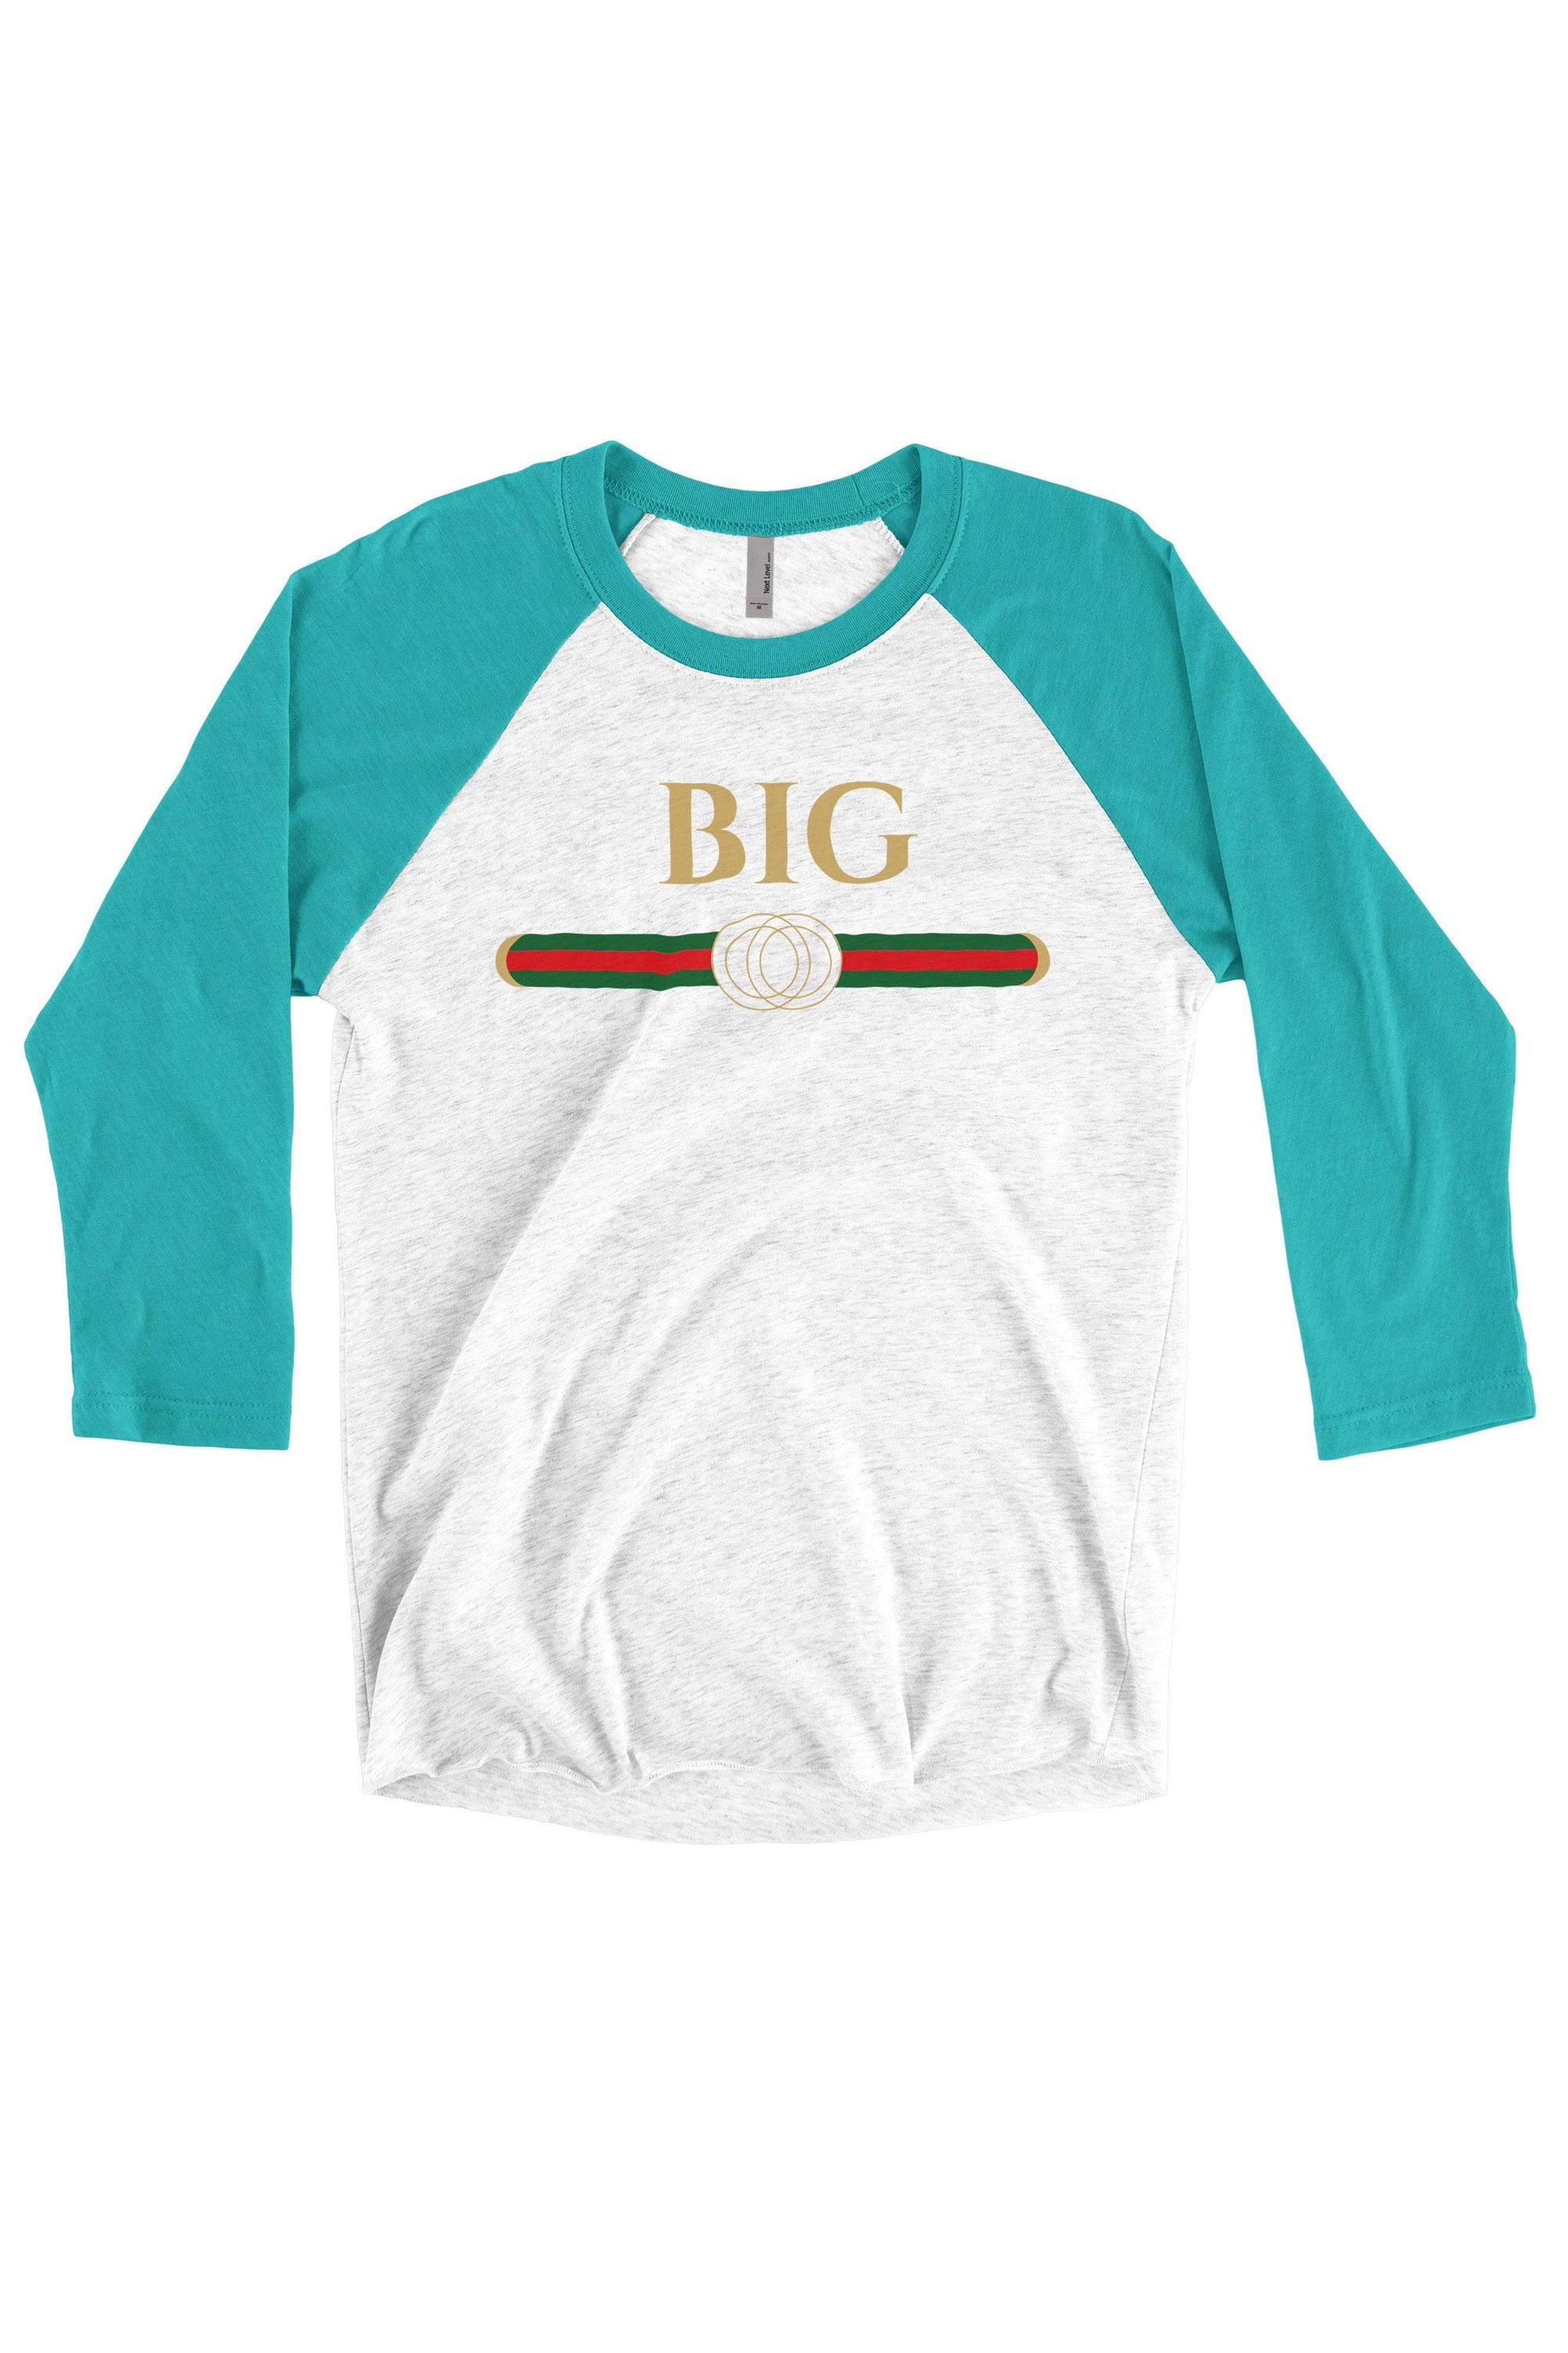 Big Little Designer Shirt - Next Level Unisex Triblend 3/4-Sleeve Raglan, Ladies, Sunny and Southern, - Sunny and Southern,